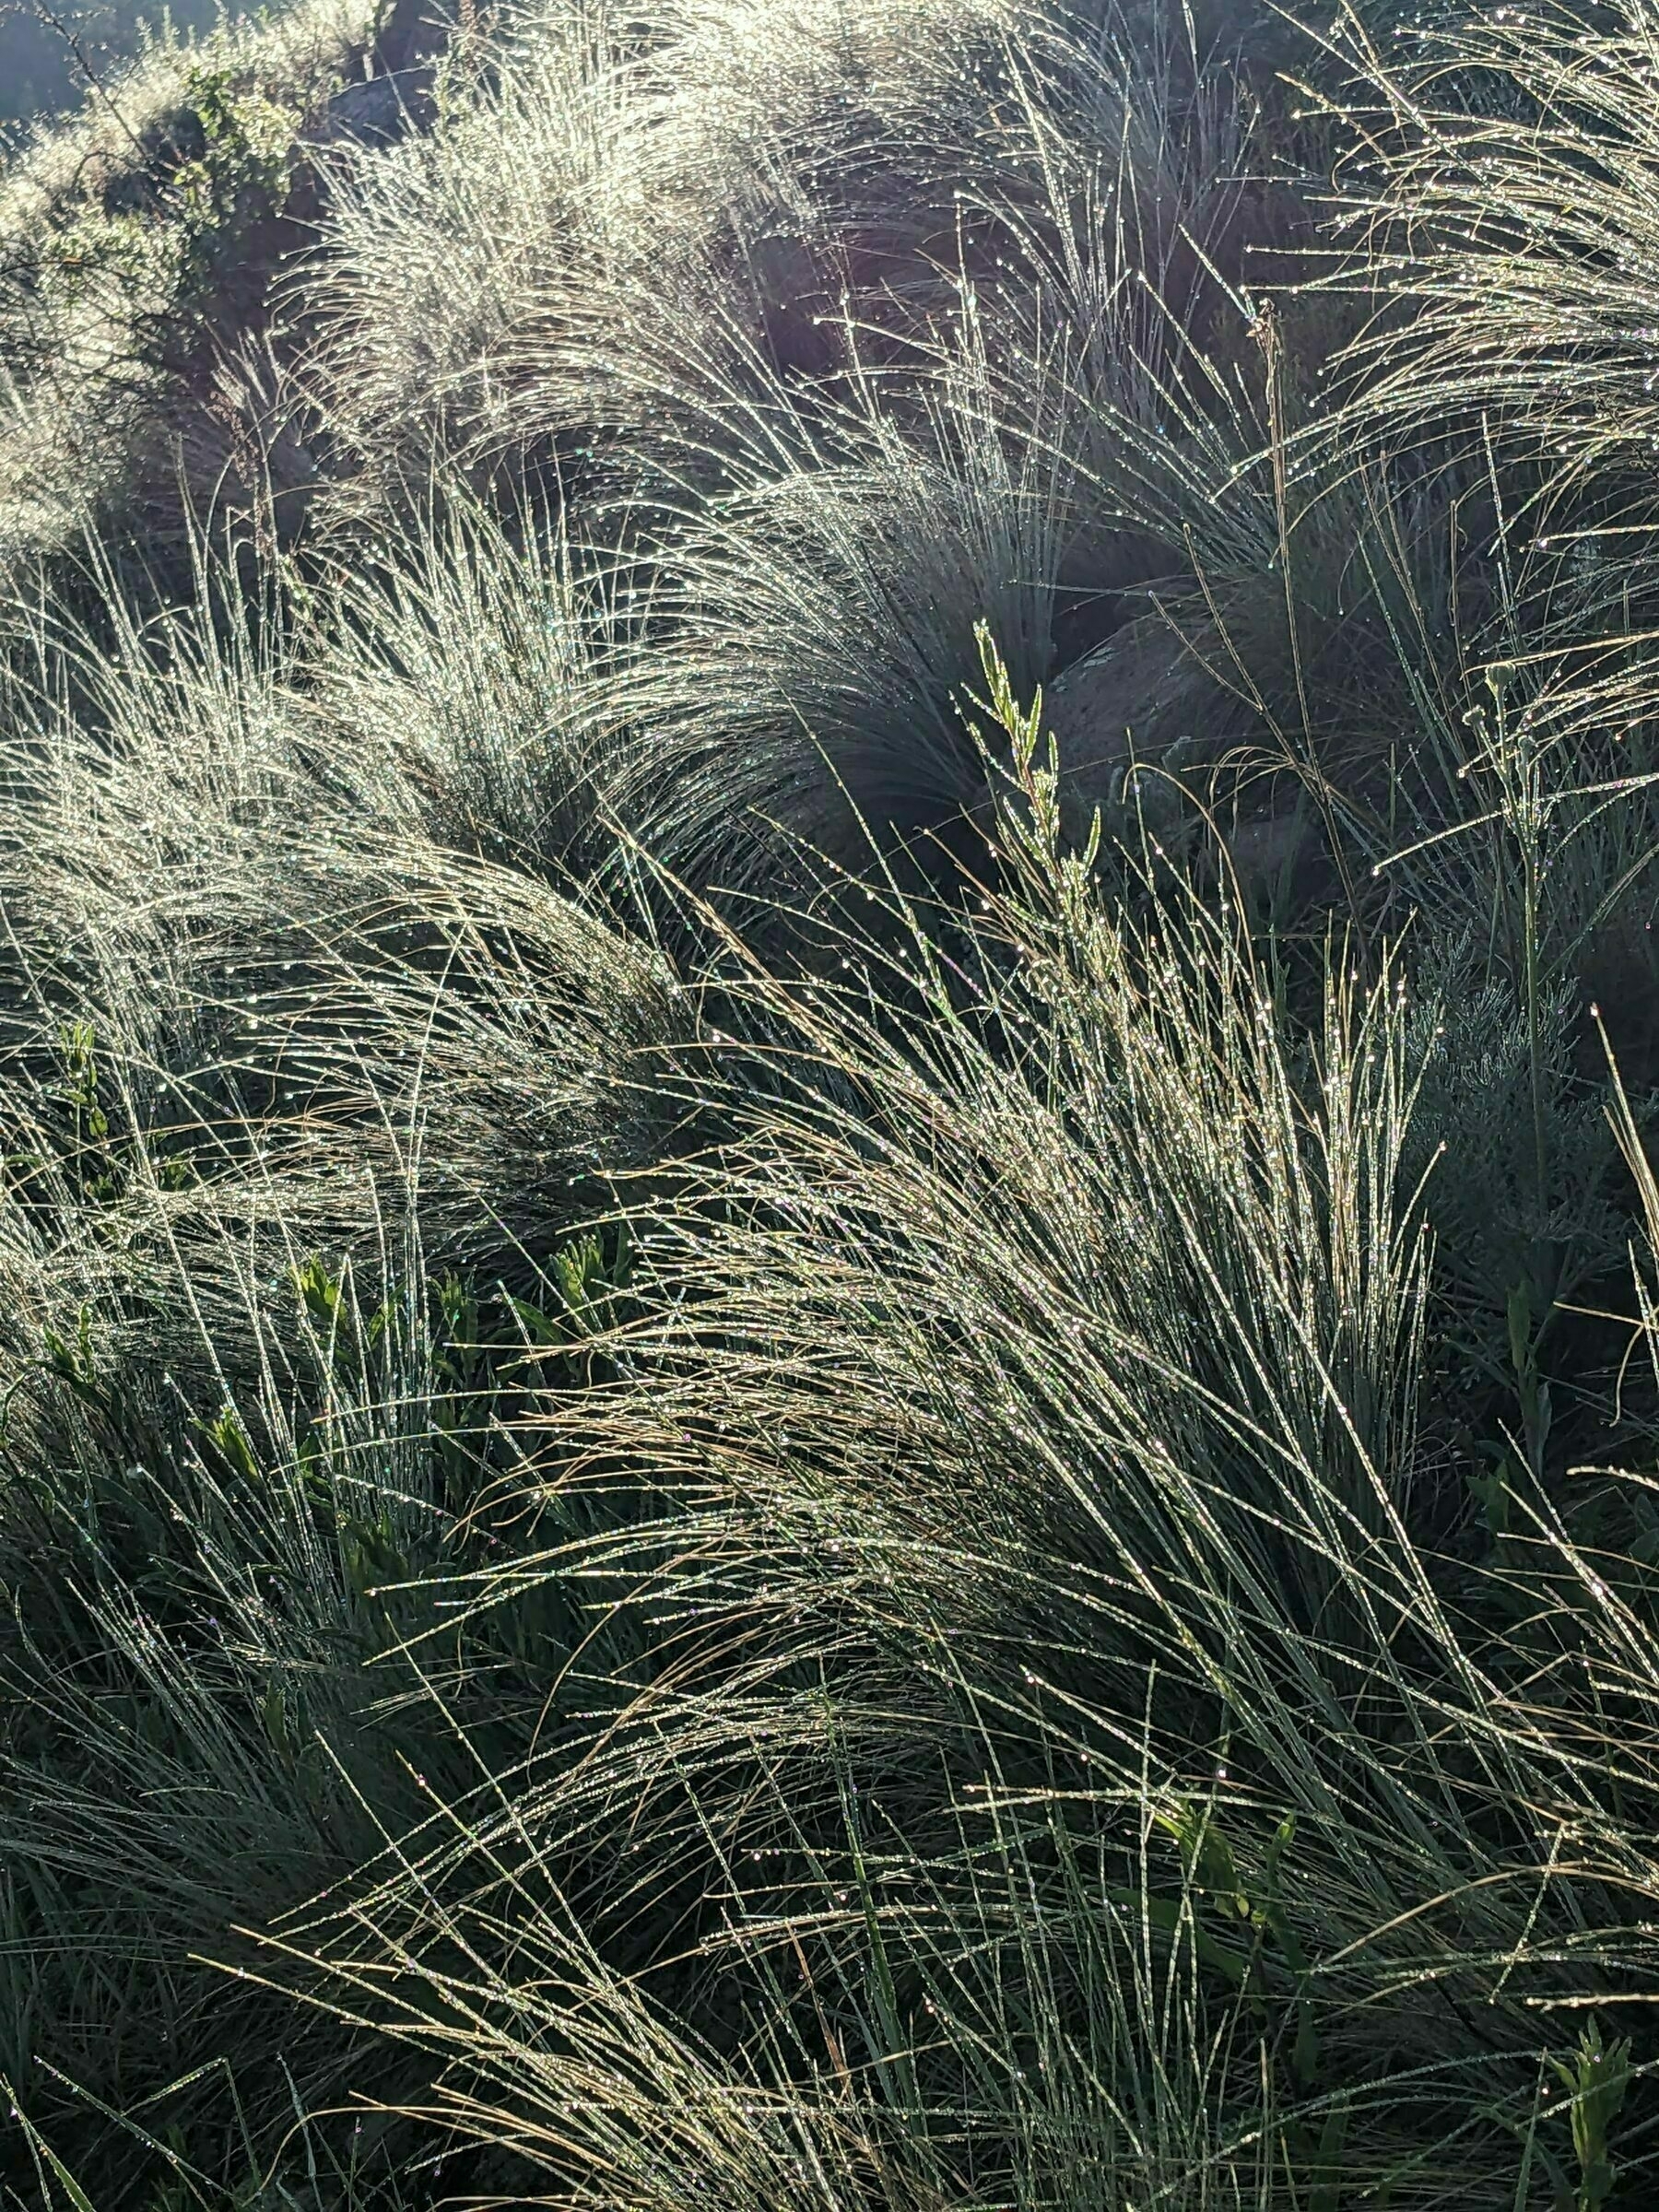 Grasses wet with dew and backlit by the rising sun